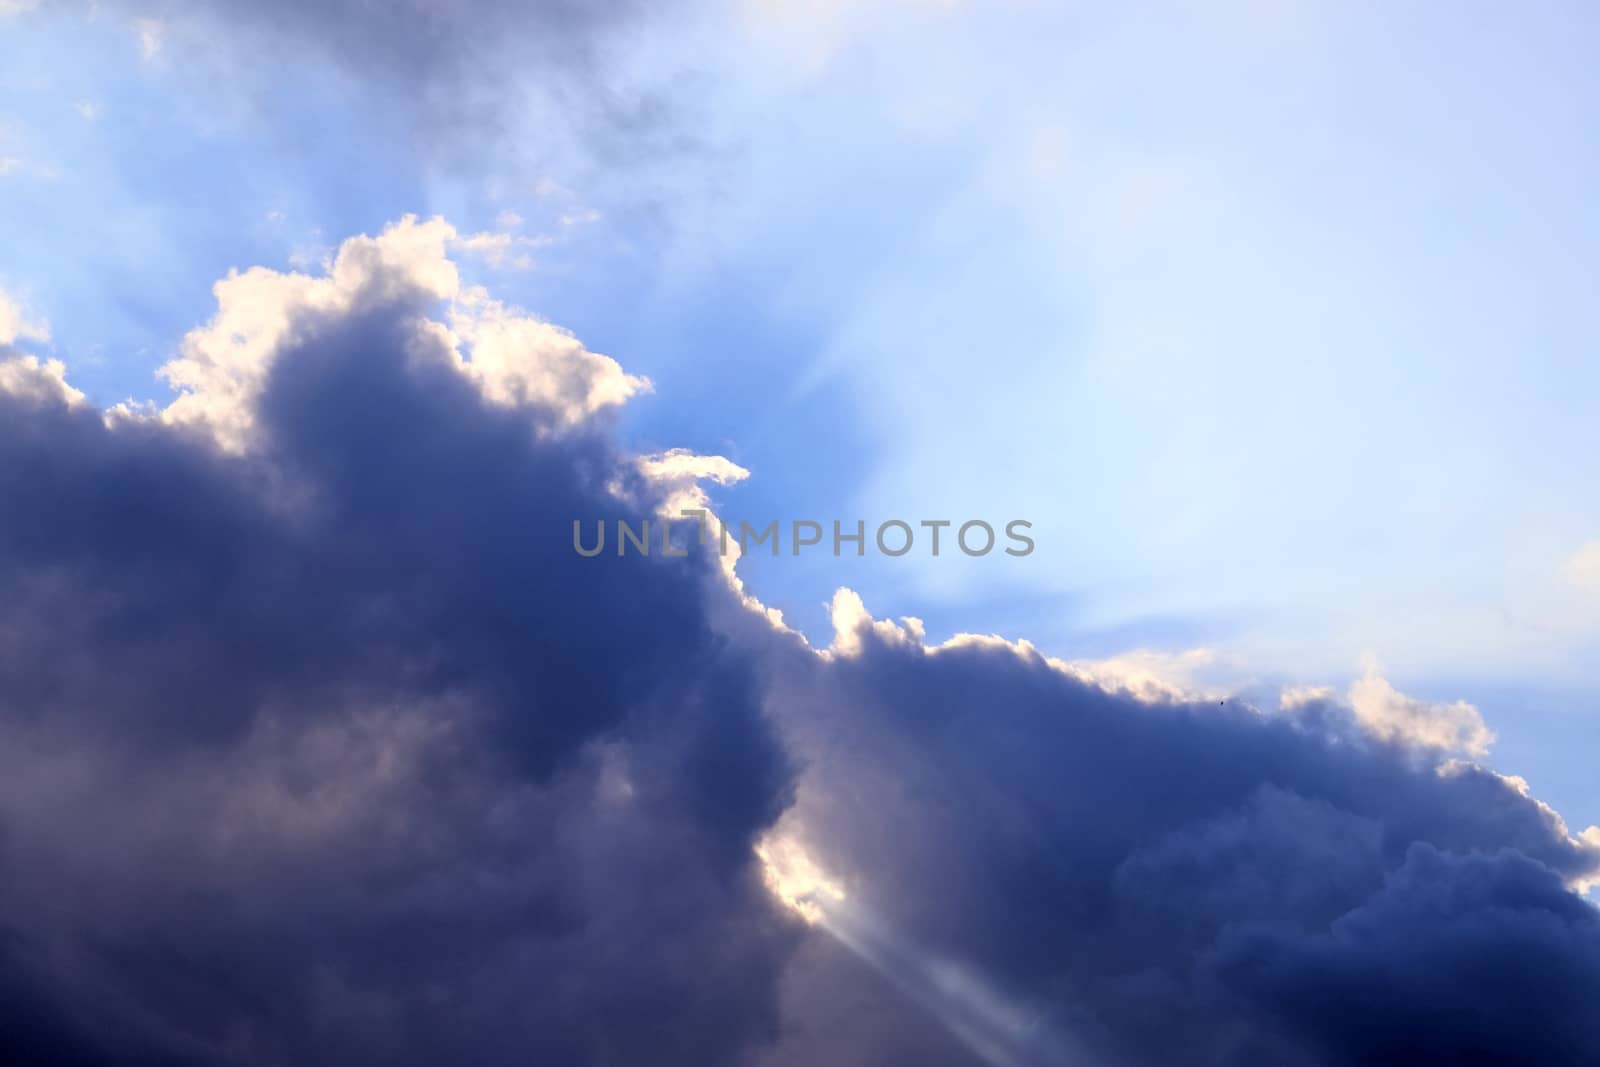 Beautiful view at sunbeams with some lens flares and clouds in a by MP_foto71